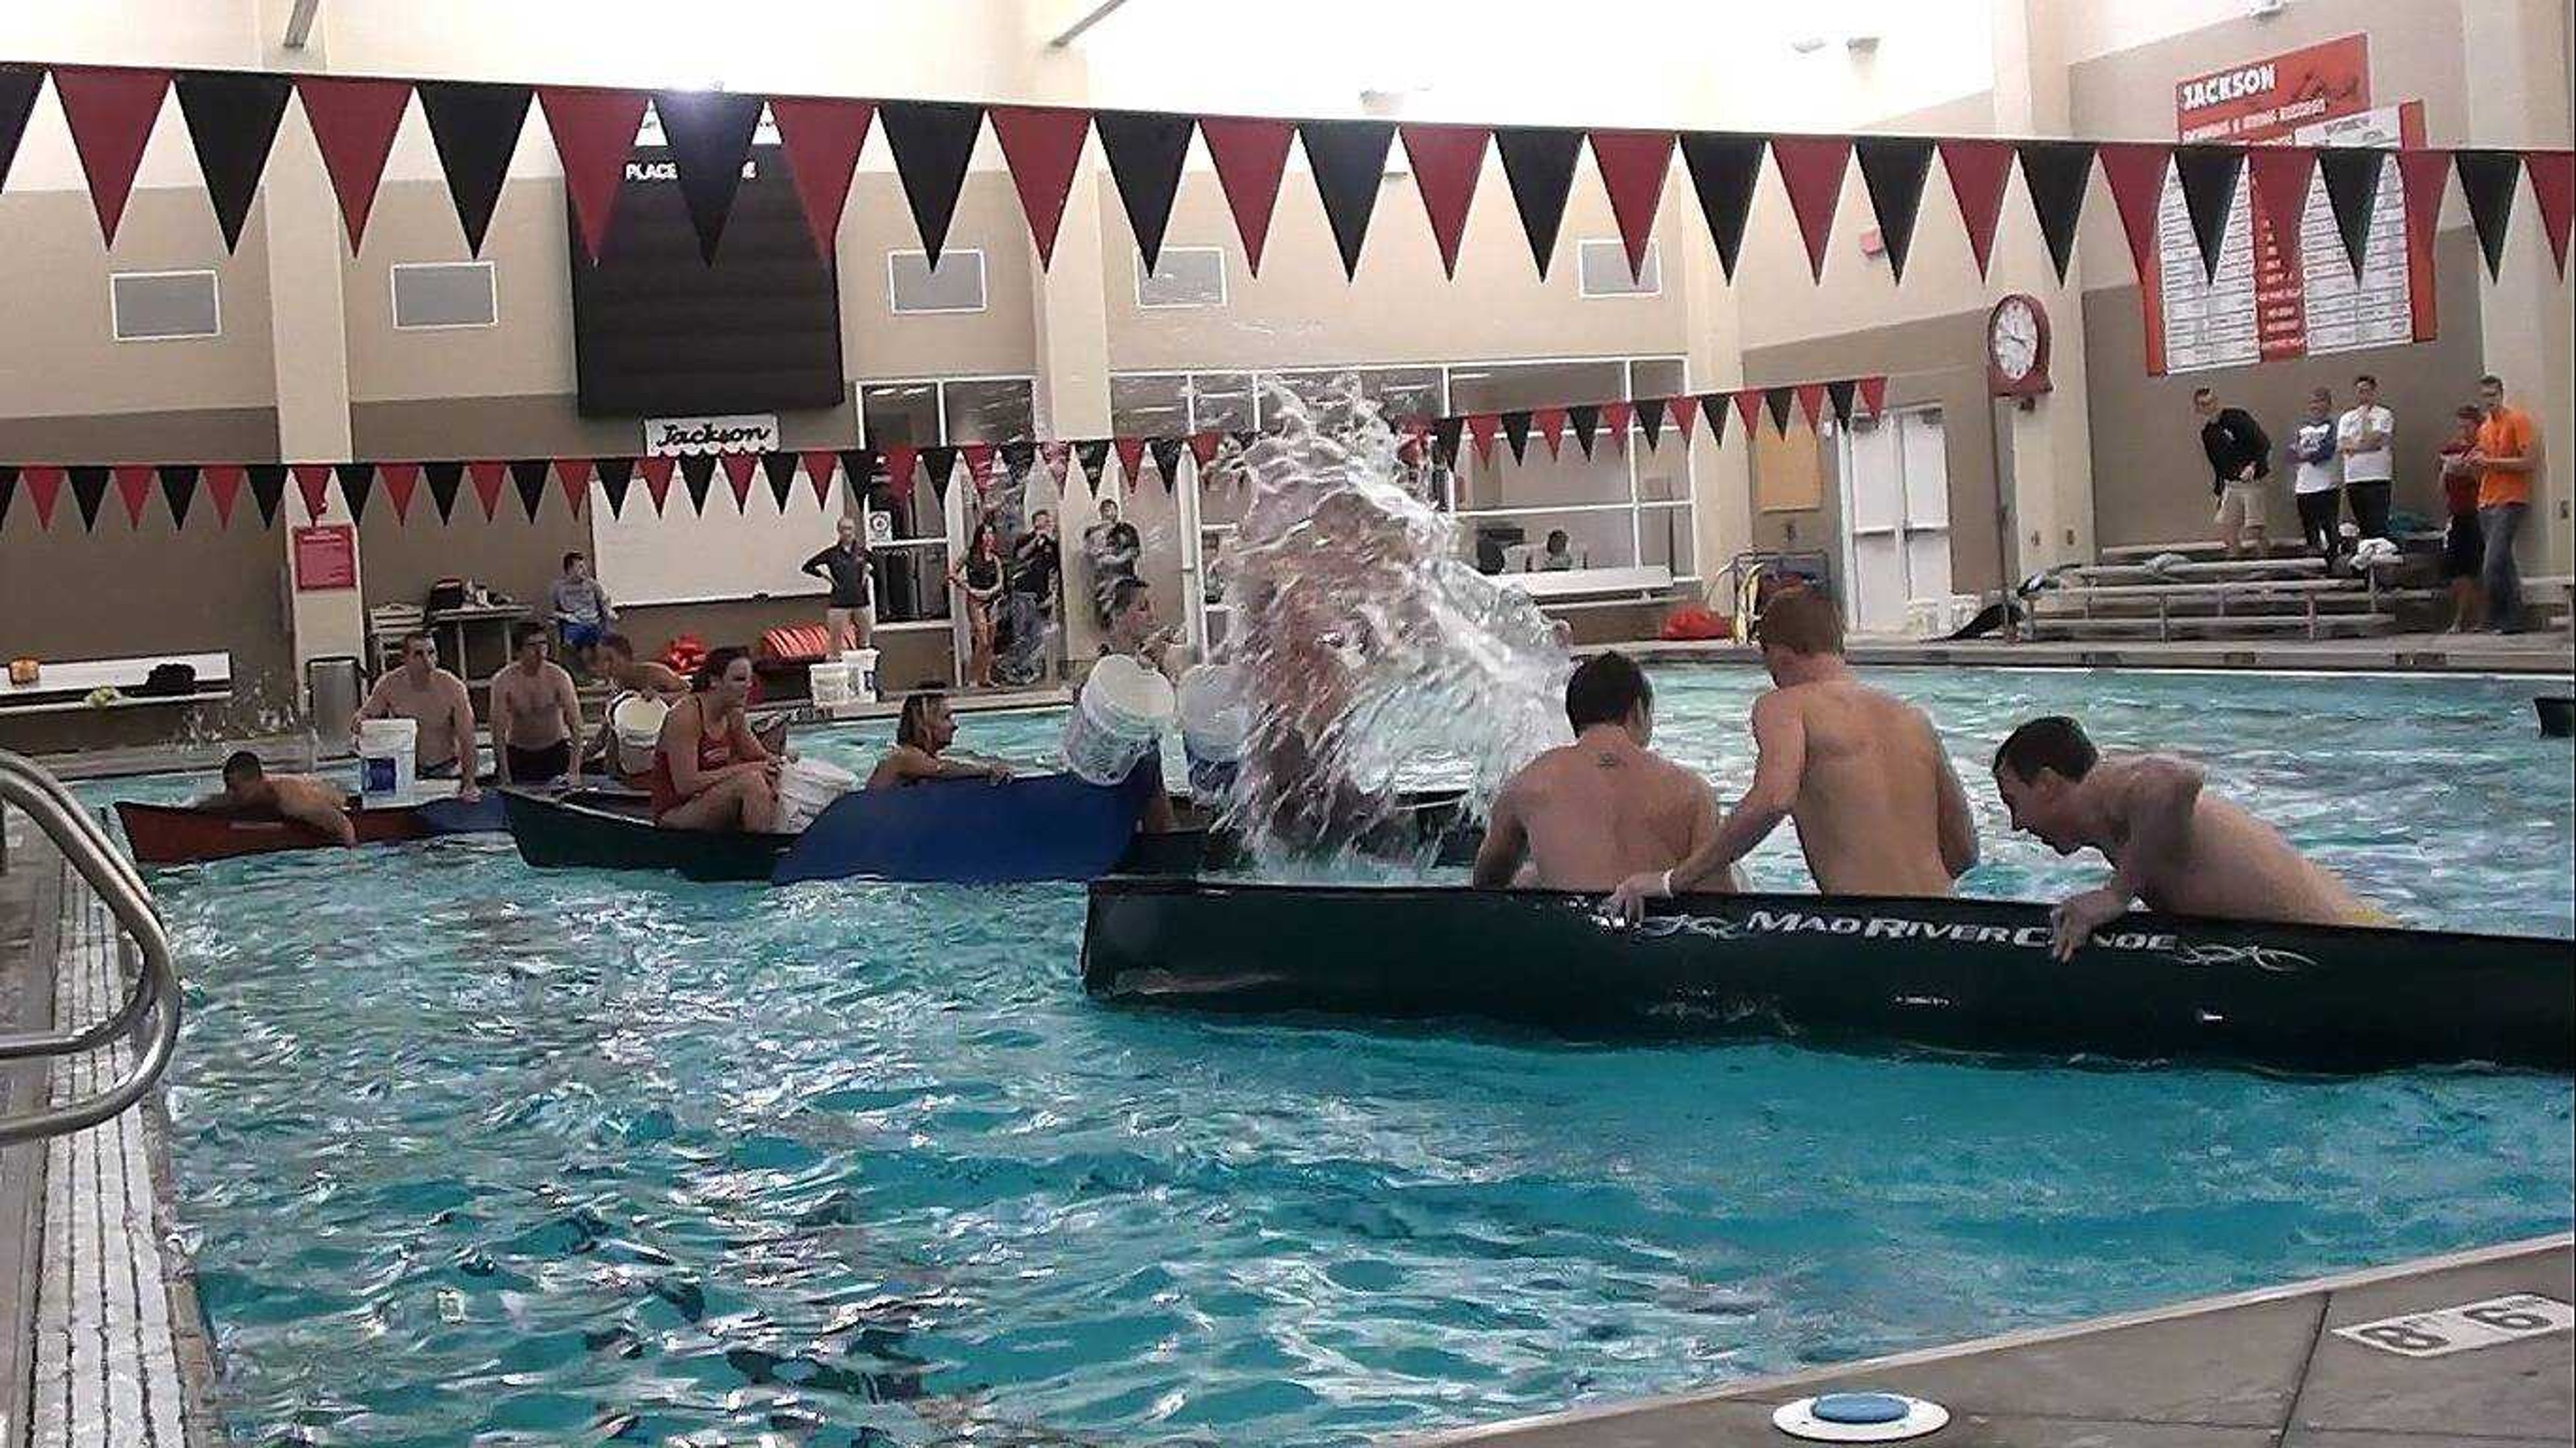 Intramurals bring battleship back for fall special event